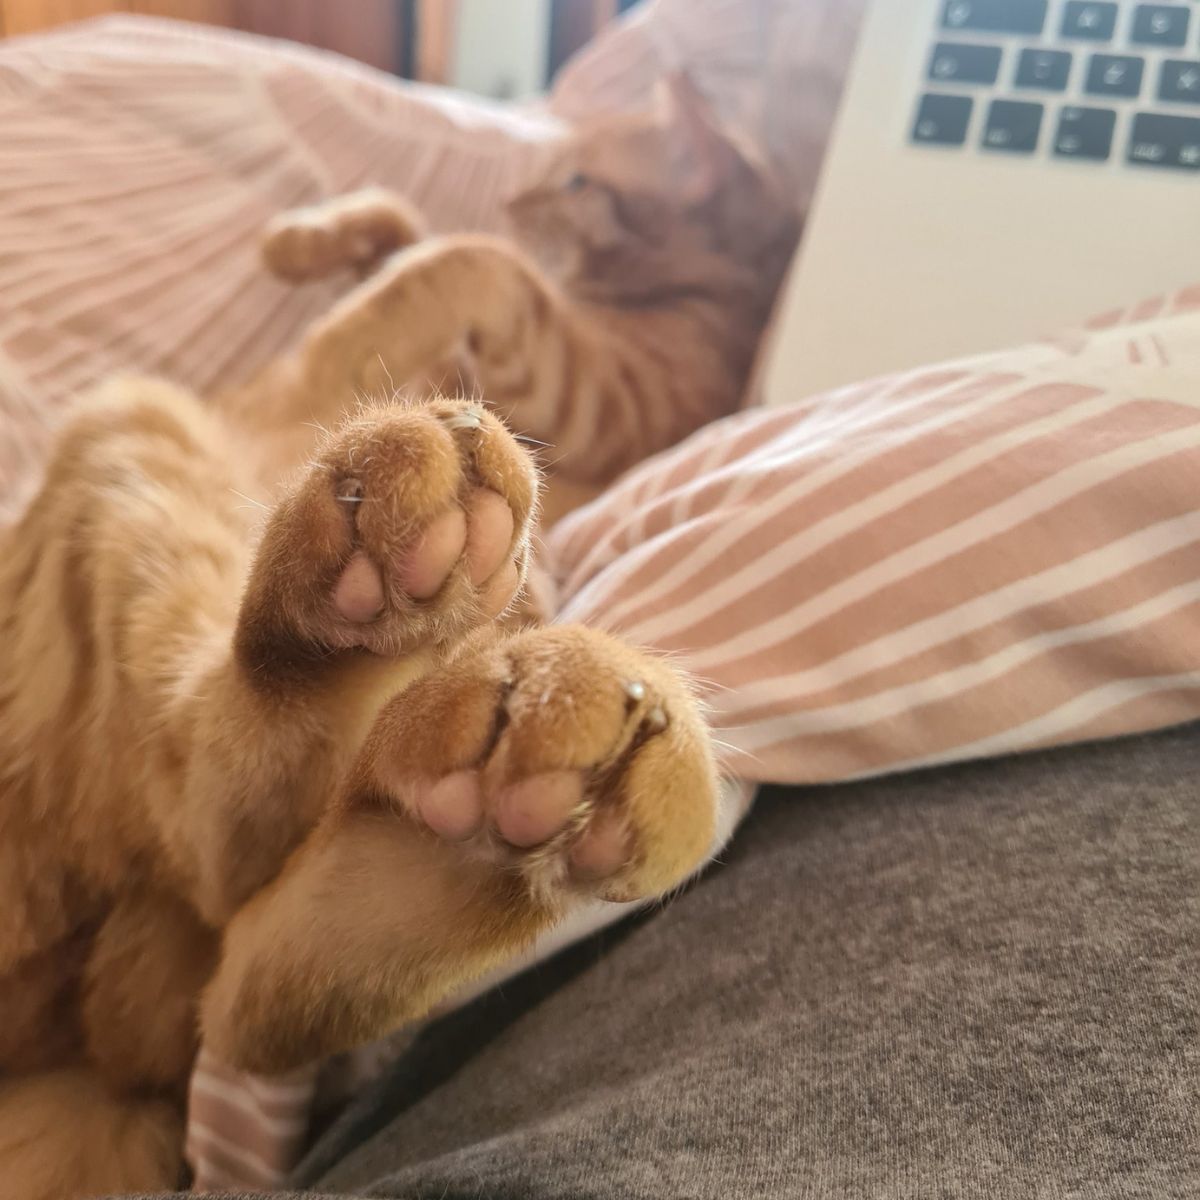 close-up photo of cat's paws